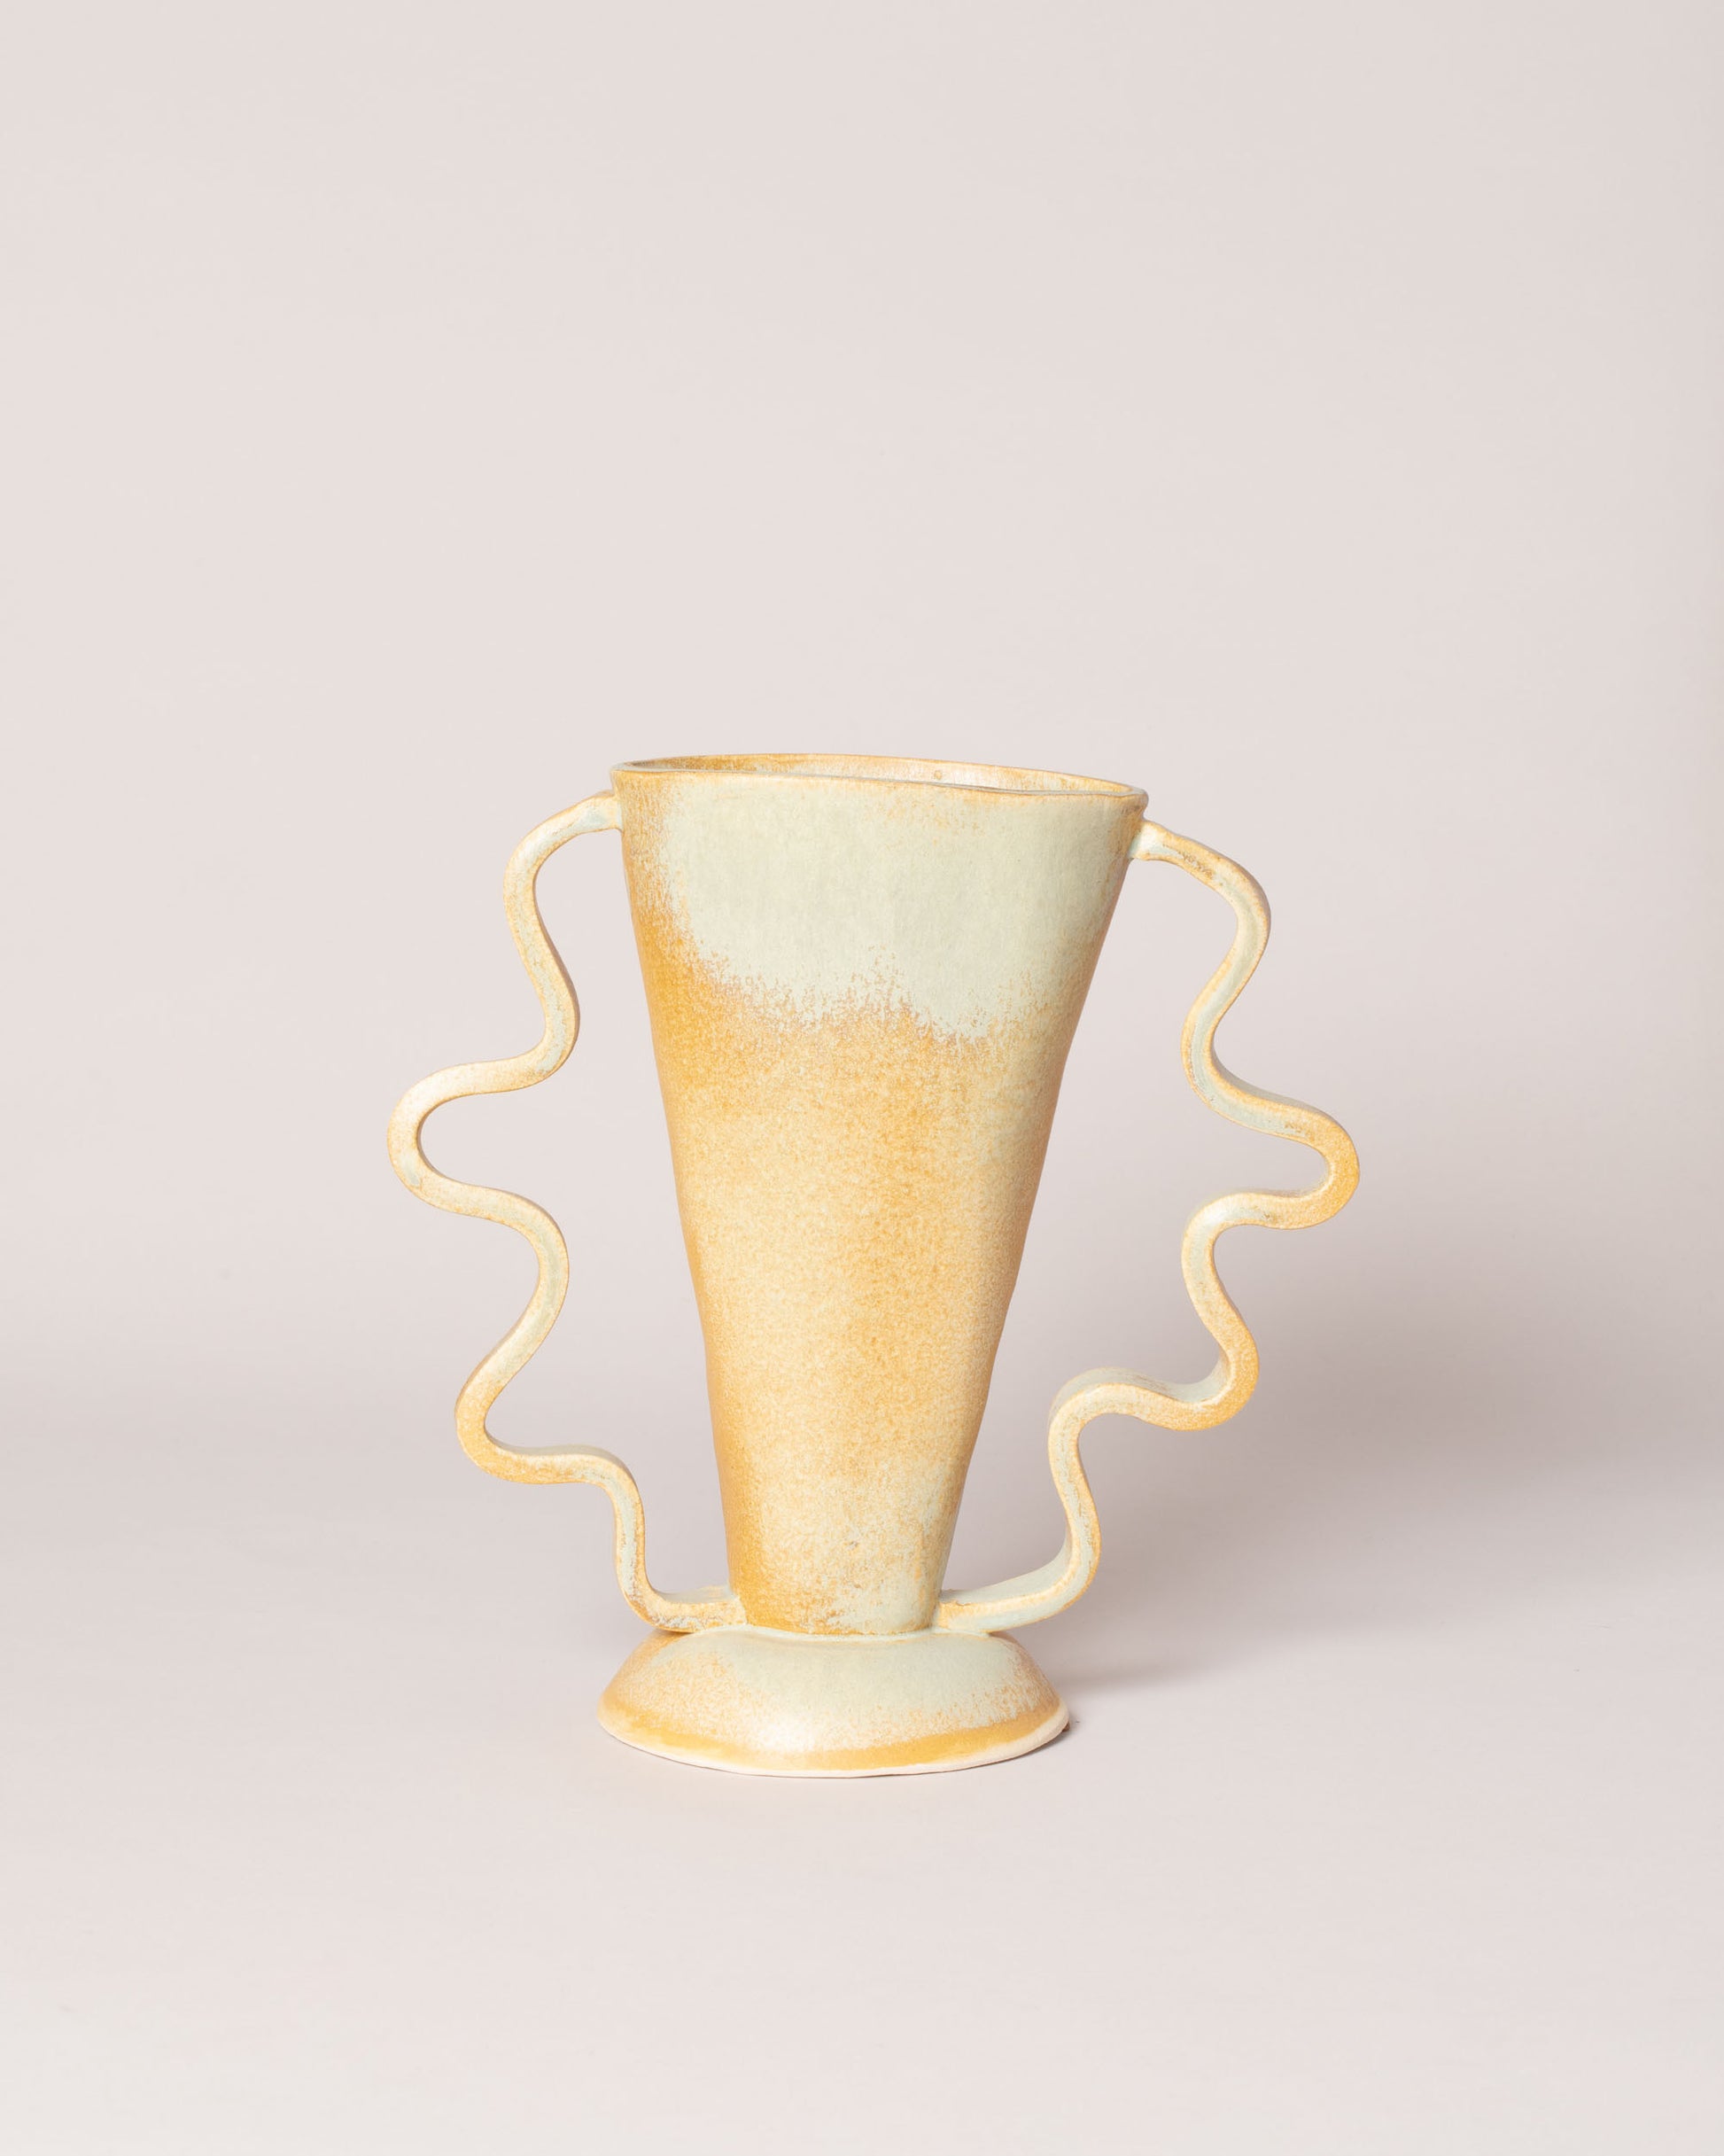 Morgan Peck Clouded Yellow Stretch Vase on light color background.